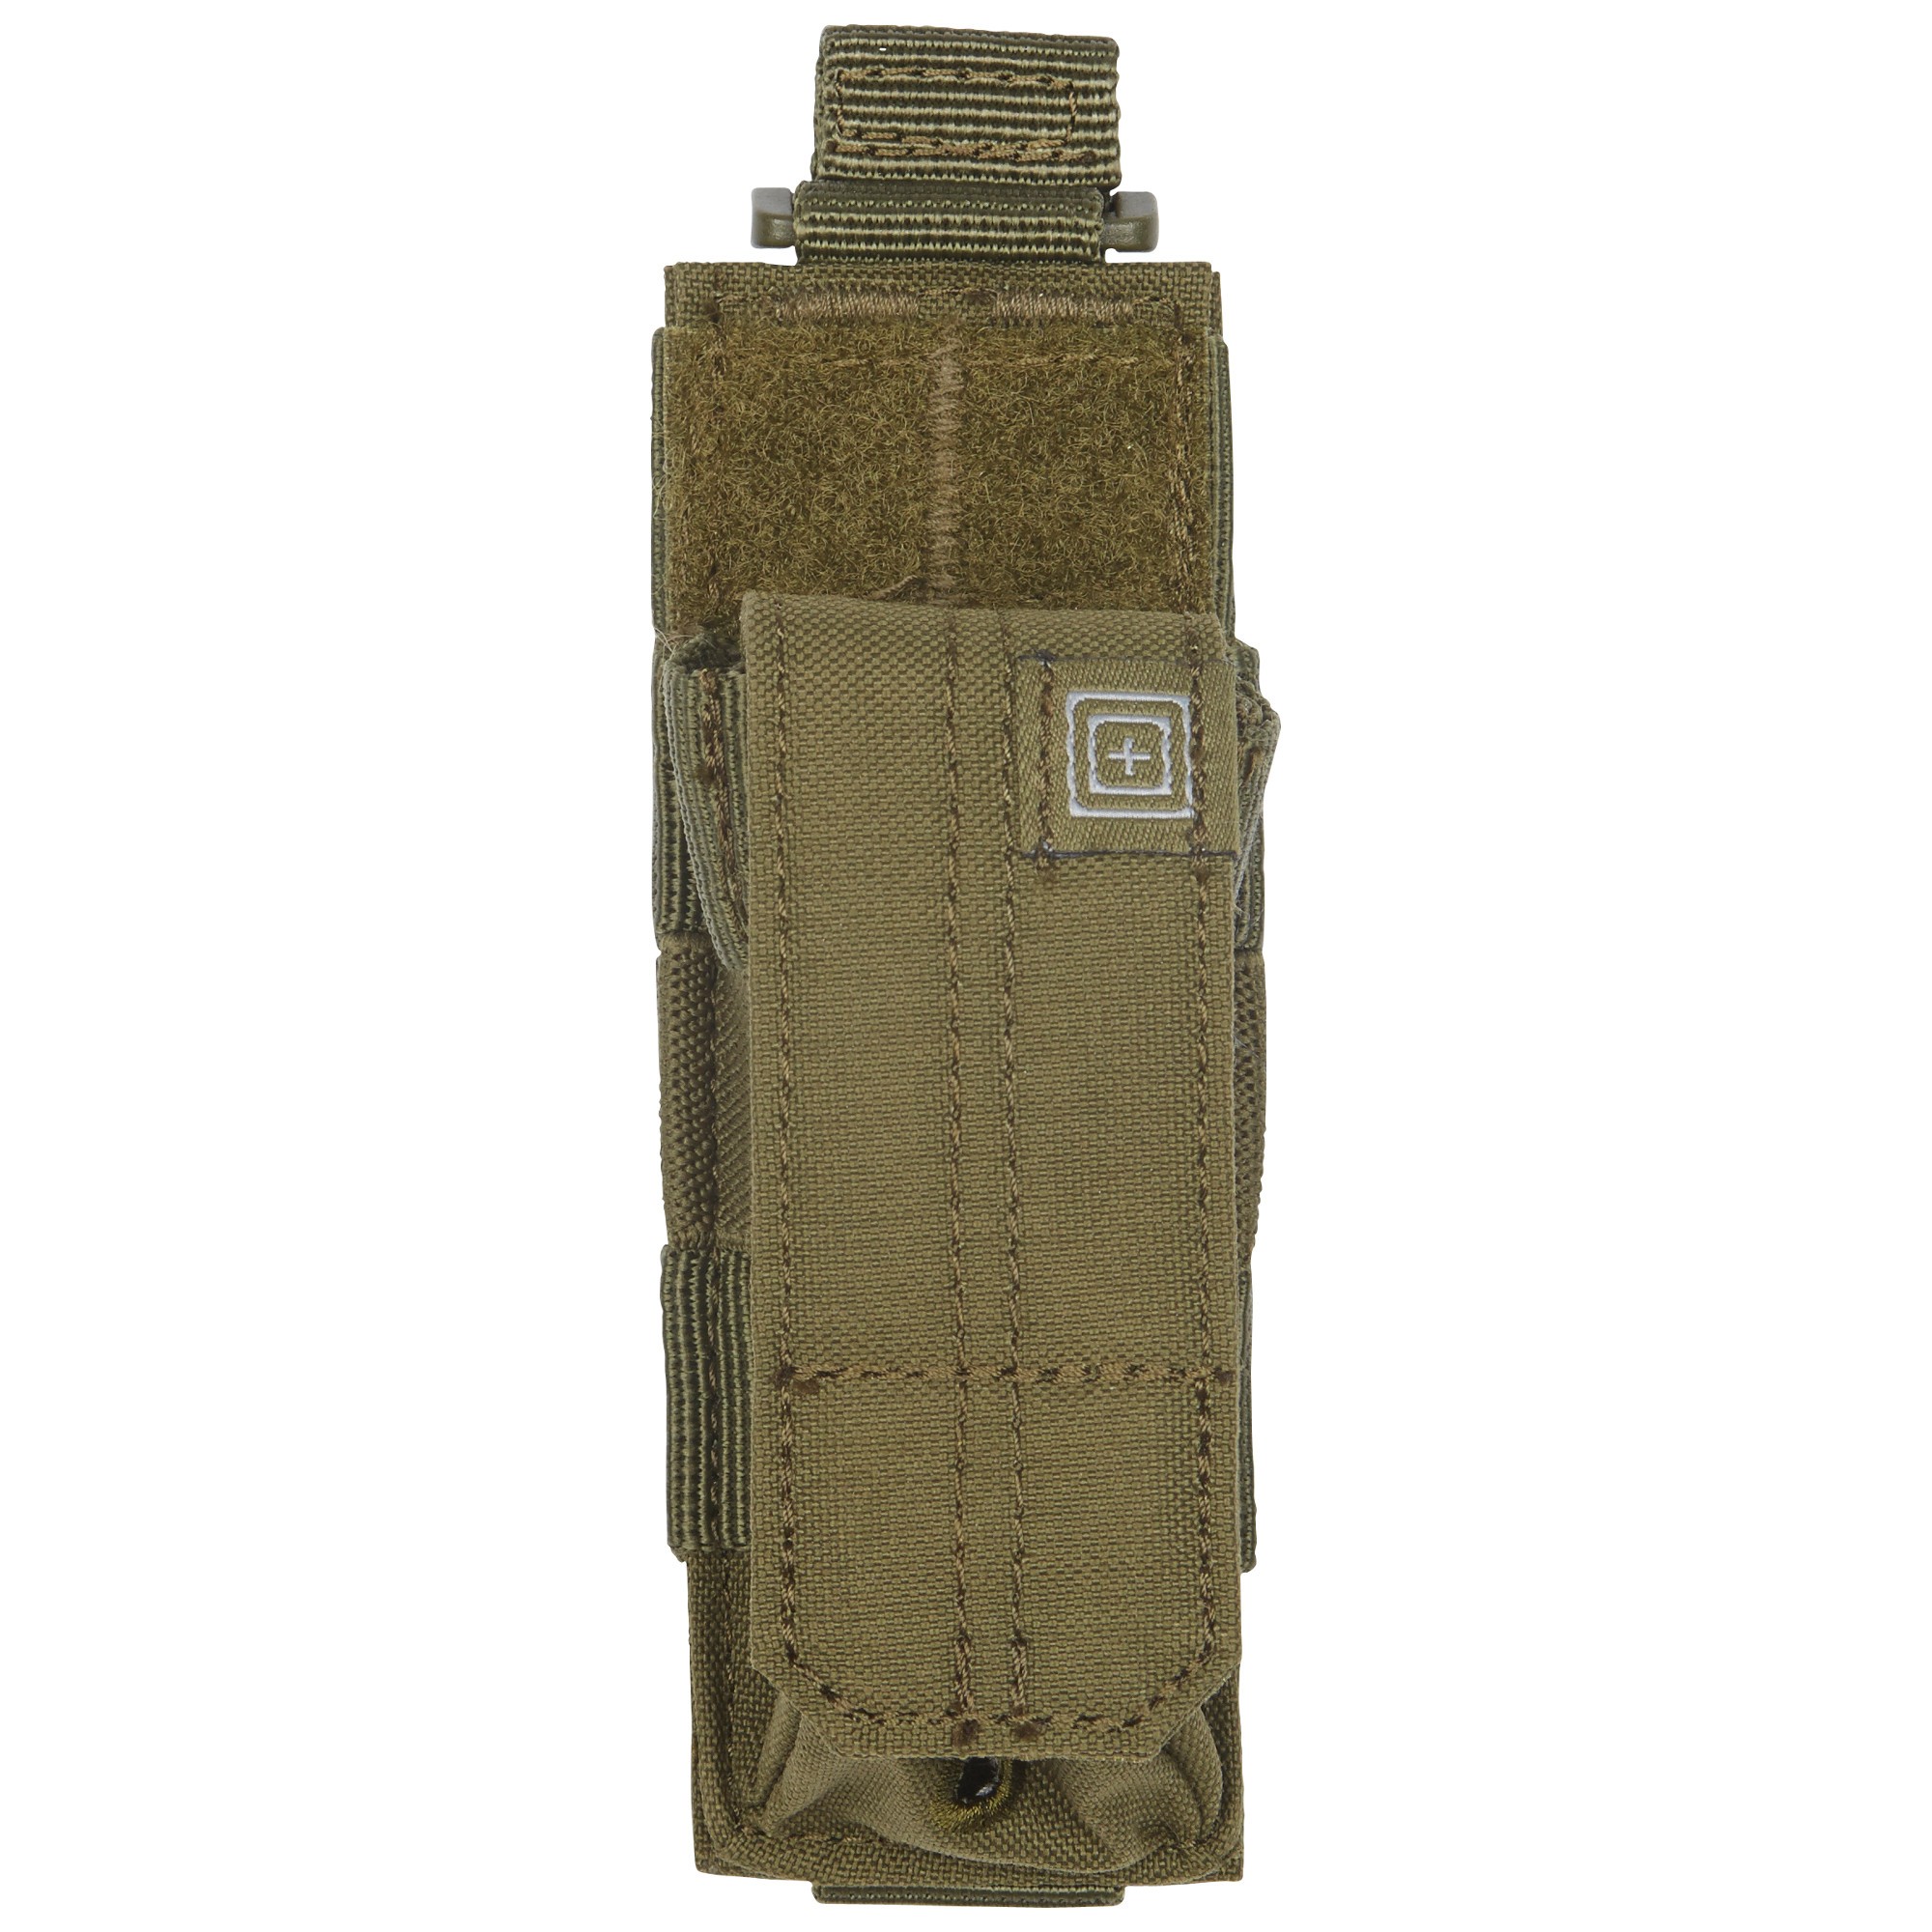 5.11 Pistol Bungee/Cover Pouch